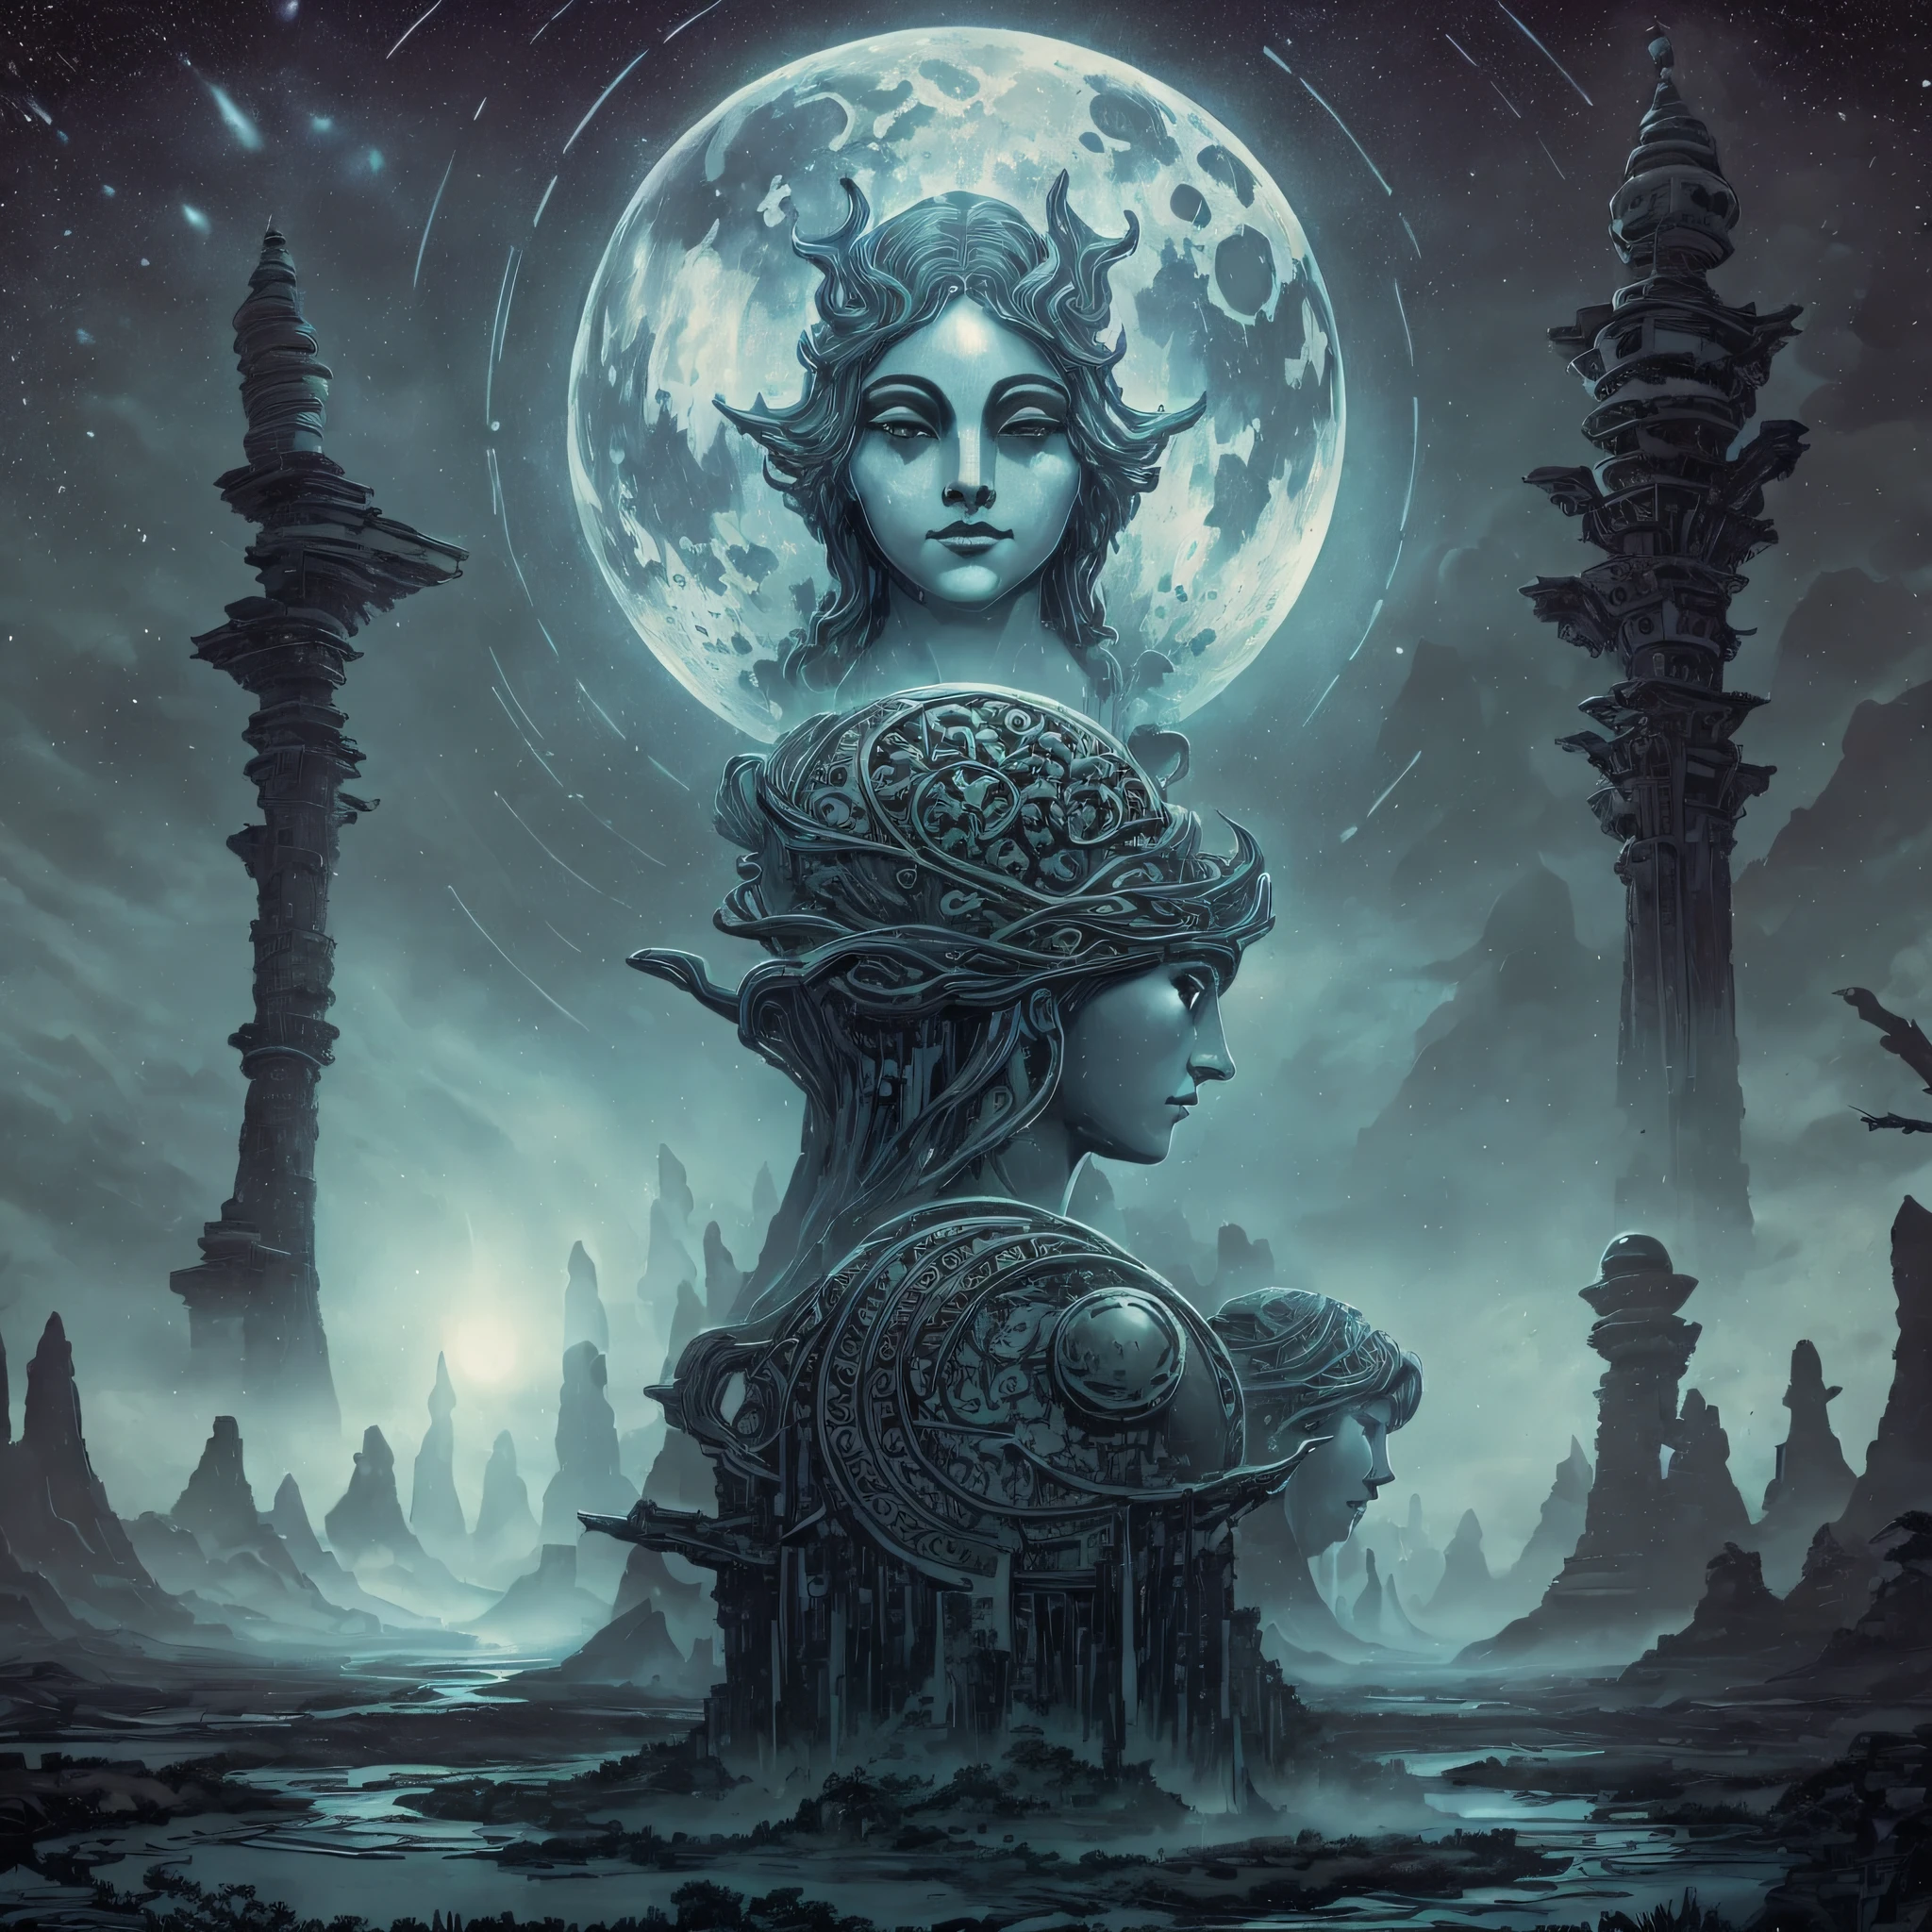 The card "The Moon" in the Tarot is a mysterious representation and full of symbolism. It depicts the full moon in the night sky, with two towers in the foreground and a path leading toward a body of water. The moon shines brightly, casting a pale, undulating light over the landscape. This card evokes a sense of mystery, intuition and illusion. The towers symbolize the balance between the conscious and the unconscious, the duality of the human mind. The path represents the inner journey we must follow to access our deepest instincts and emotions. Water represents the realm of emotions, dreams, and the subconscious. The Moon card invites us to explore the mysteries within ourselves, to embrace our dark side, and to trust our intuition. She reveals that not everything is as it seems, that there are secrets and illusions that need to be unraveled. This card can also indicate the presence of hidden fears and anxieties, which can be confronted and overcome through understanding and self-knowledge. The Moon reminds us that the spiritual journey is not always clear and direct, but that trusting our intuition will guide us along the way. It challenges us to look beyond appearances and face our fears to attain truth and inner enlightenment.